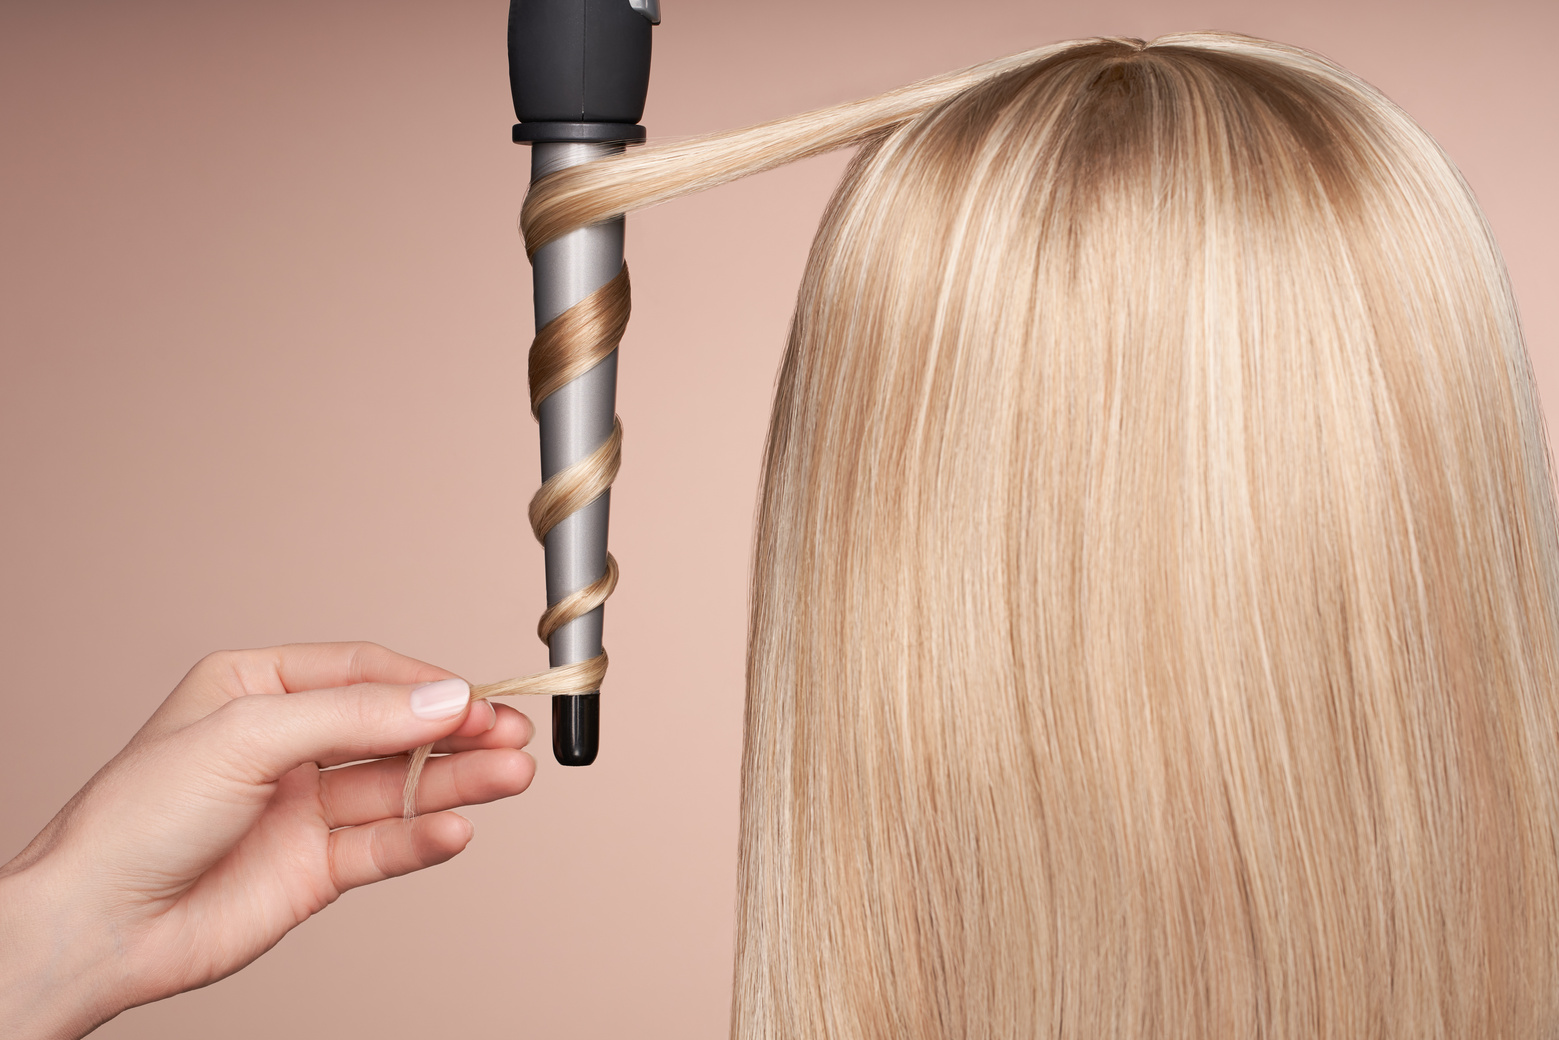 The hairdresser curls long hair with a Curling iron